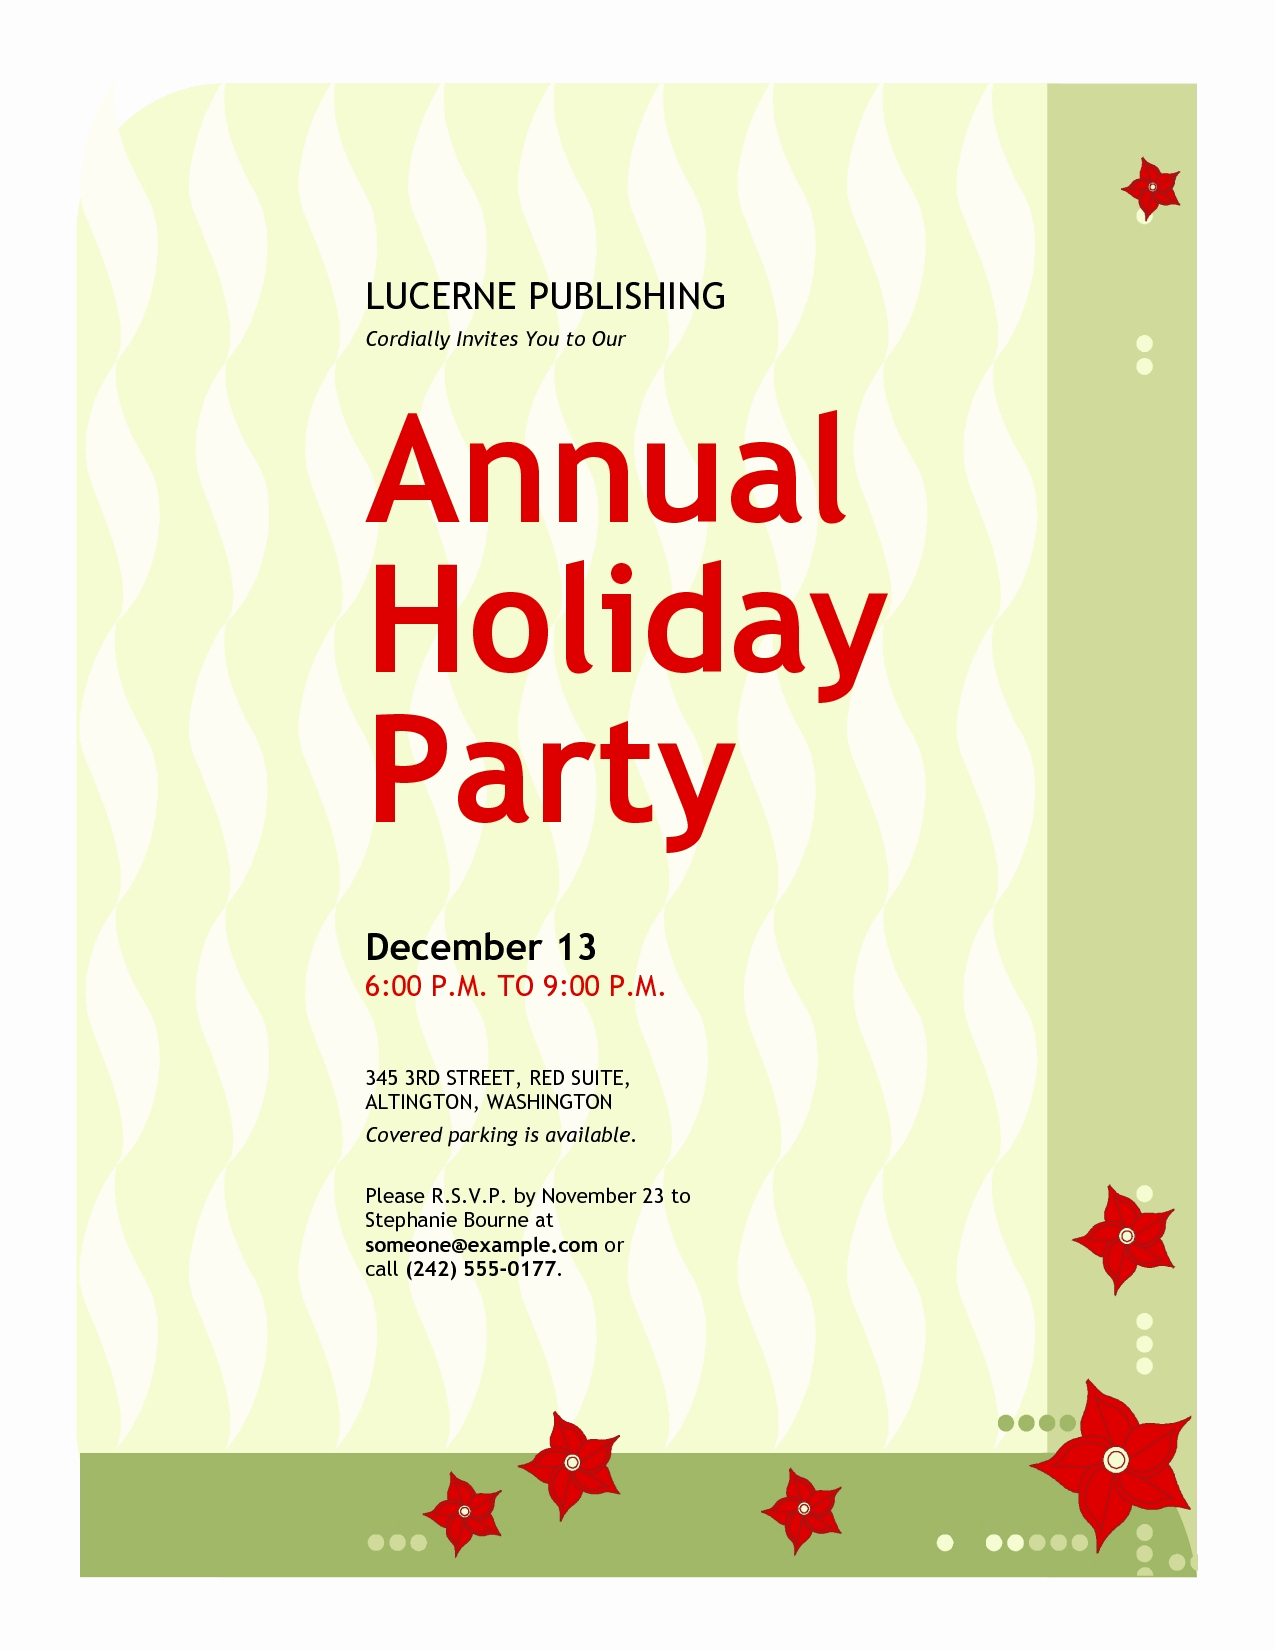 Office Christmas Party Invitation Wording Elegant Christmas Fice Party Invitation Wording Cobypic